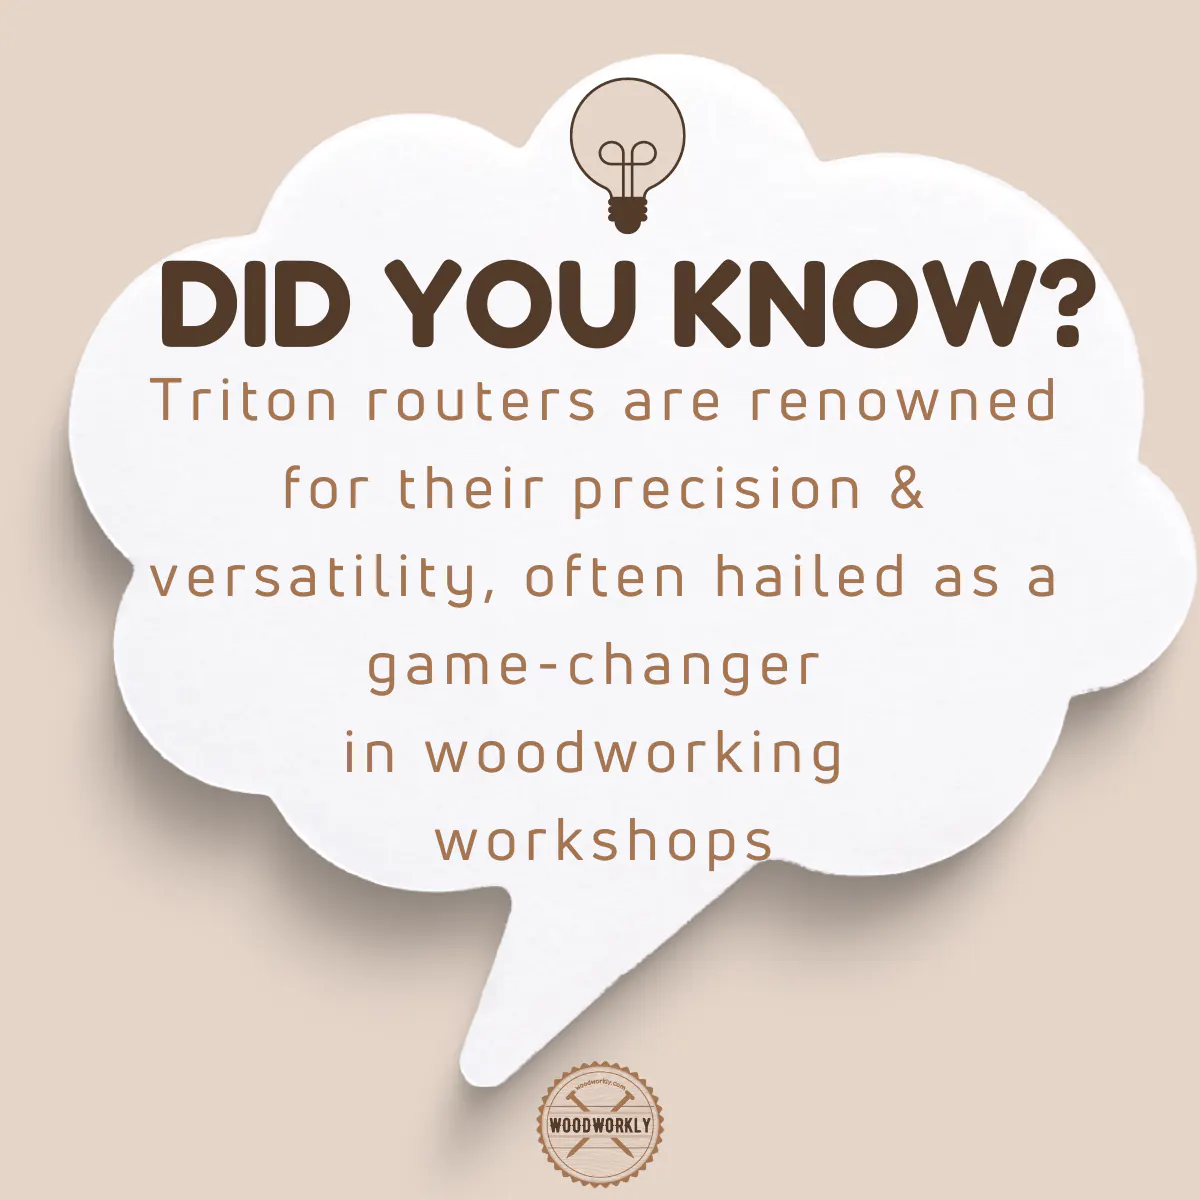 Did you know fact about Triton Router